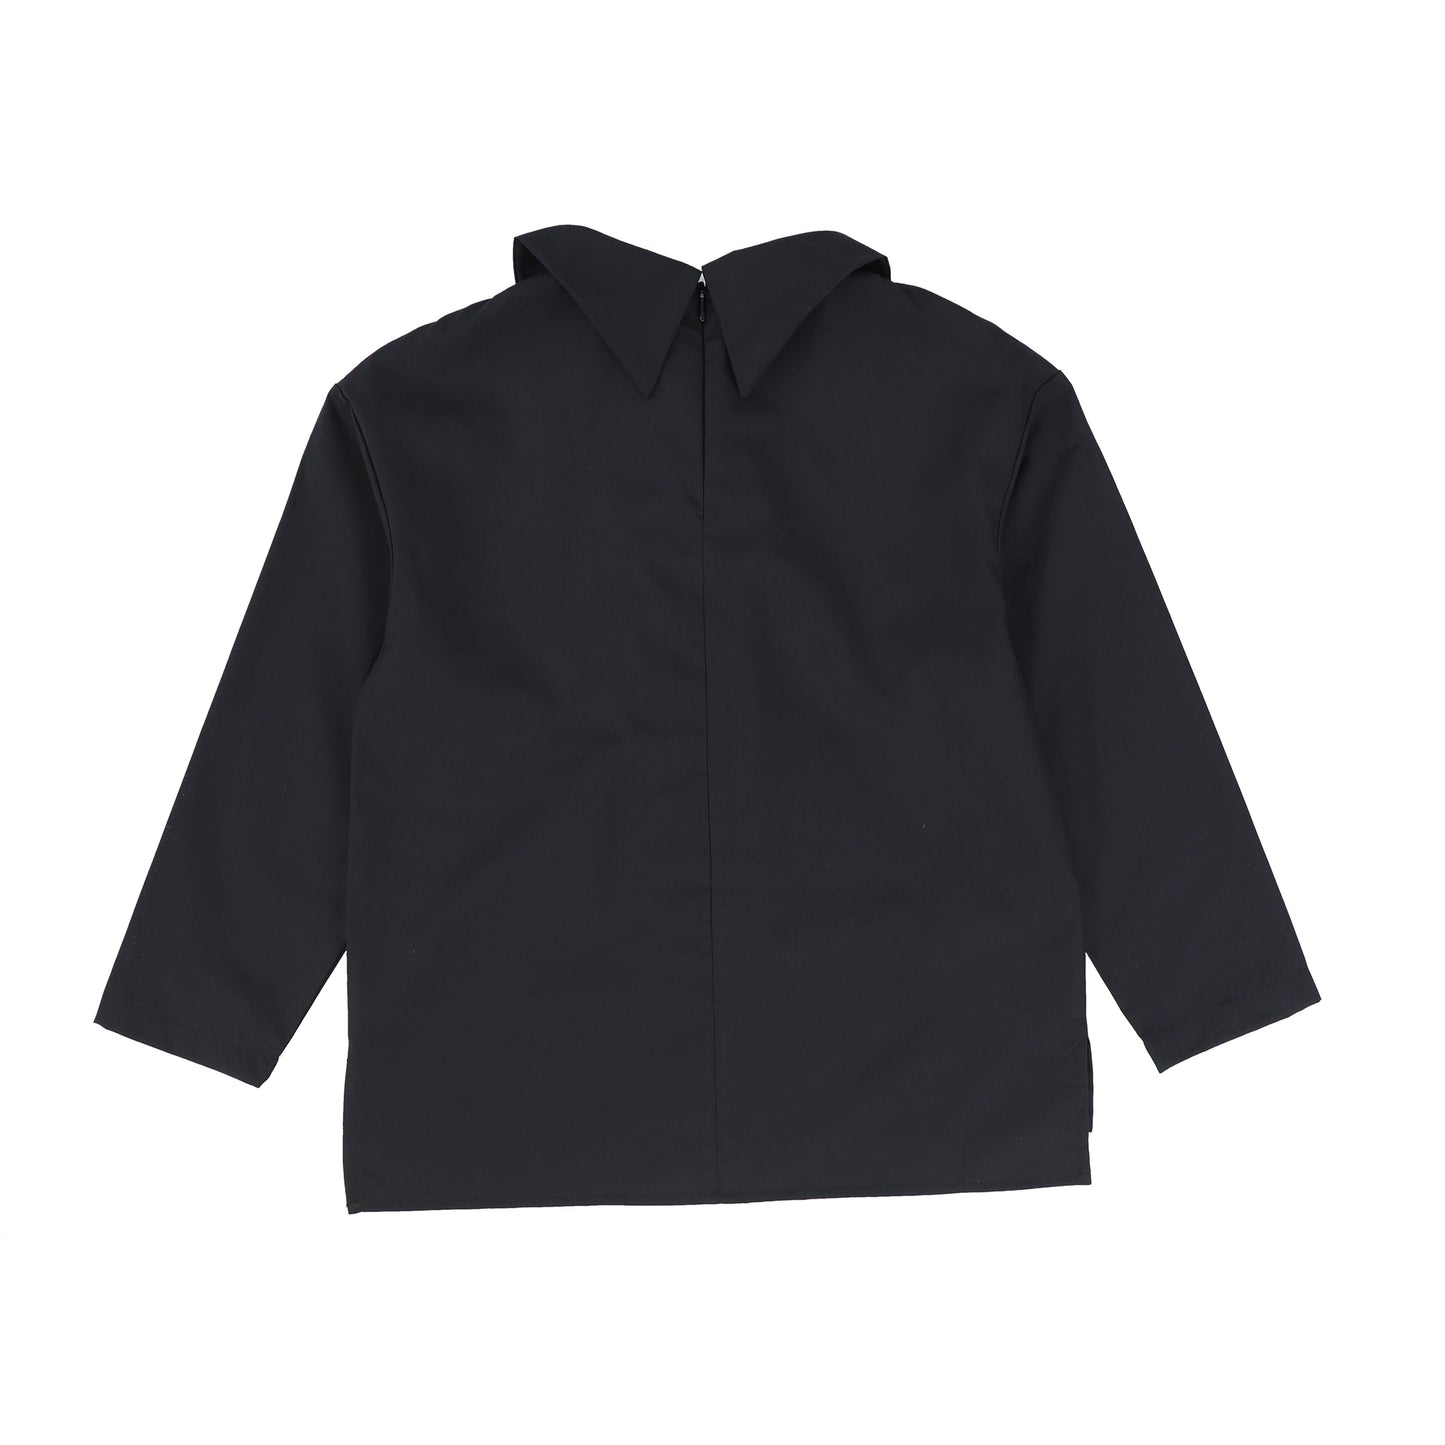 BE FOR ALL DARK NAVY COLLARED TOP [Final Sale]